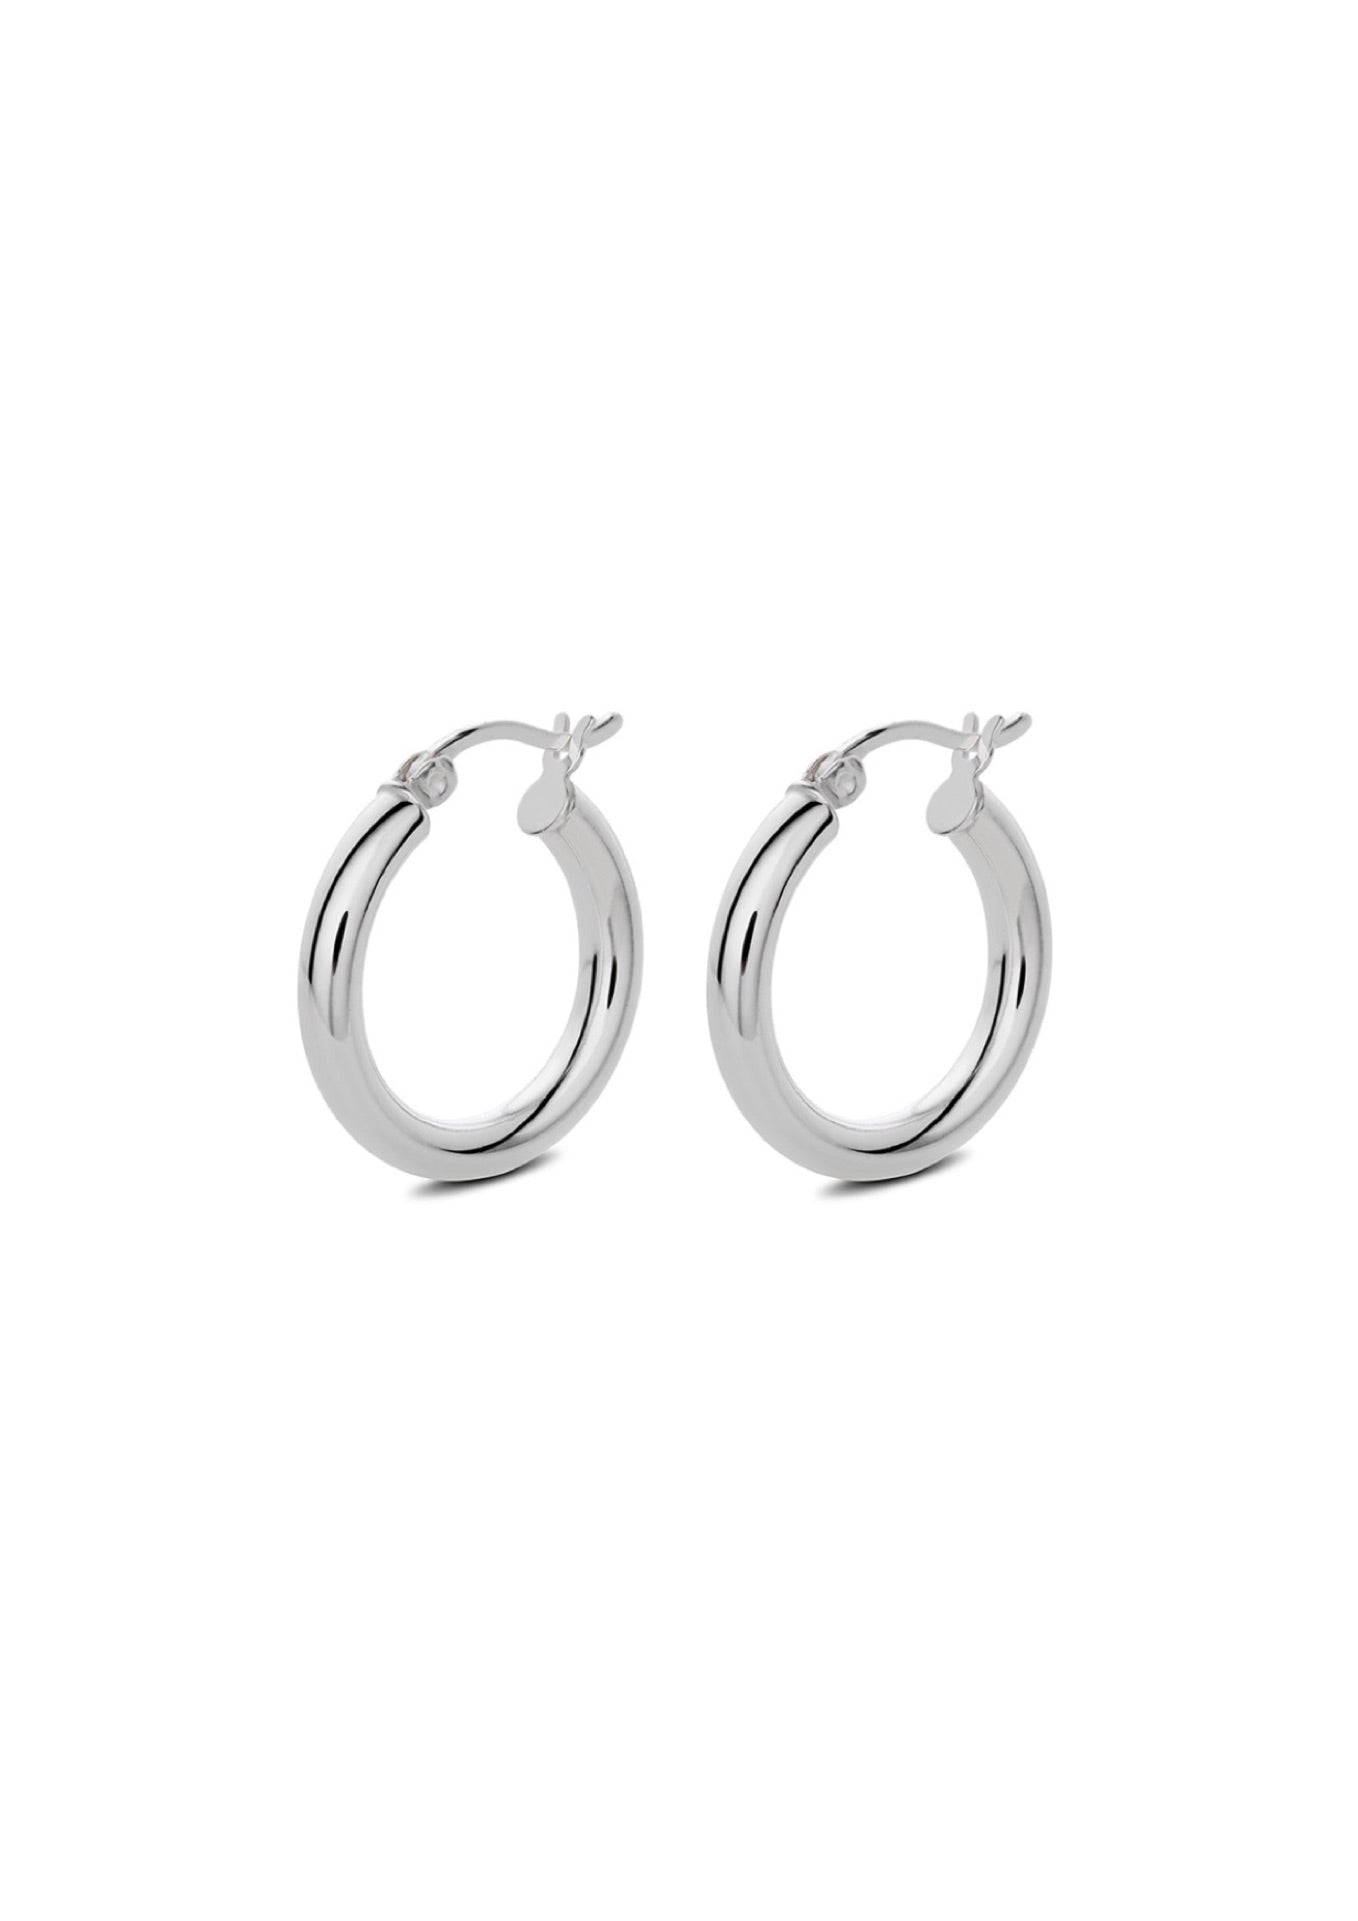 NO MORE accessories Dizzy Hoops in sterling silver